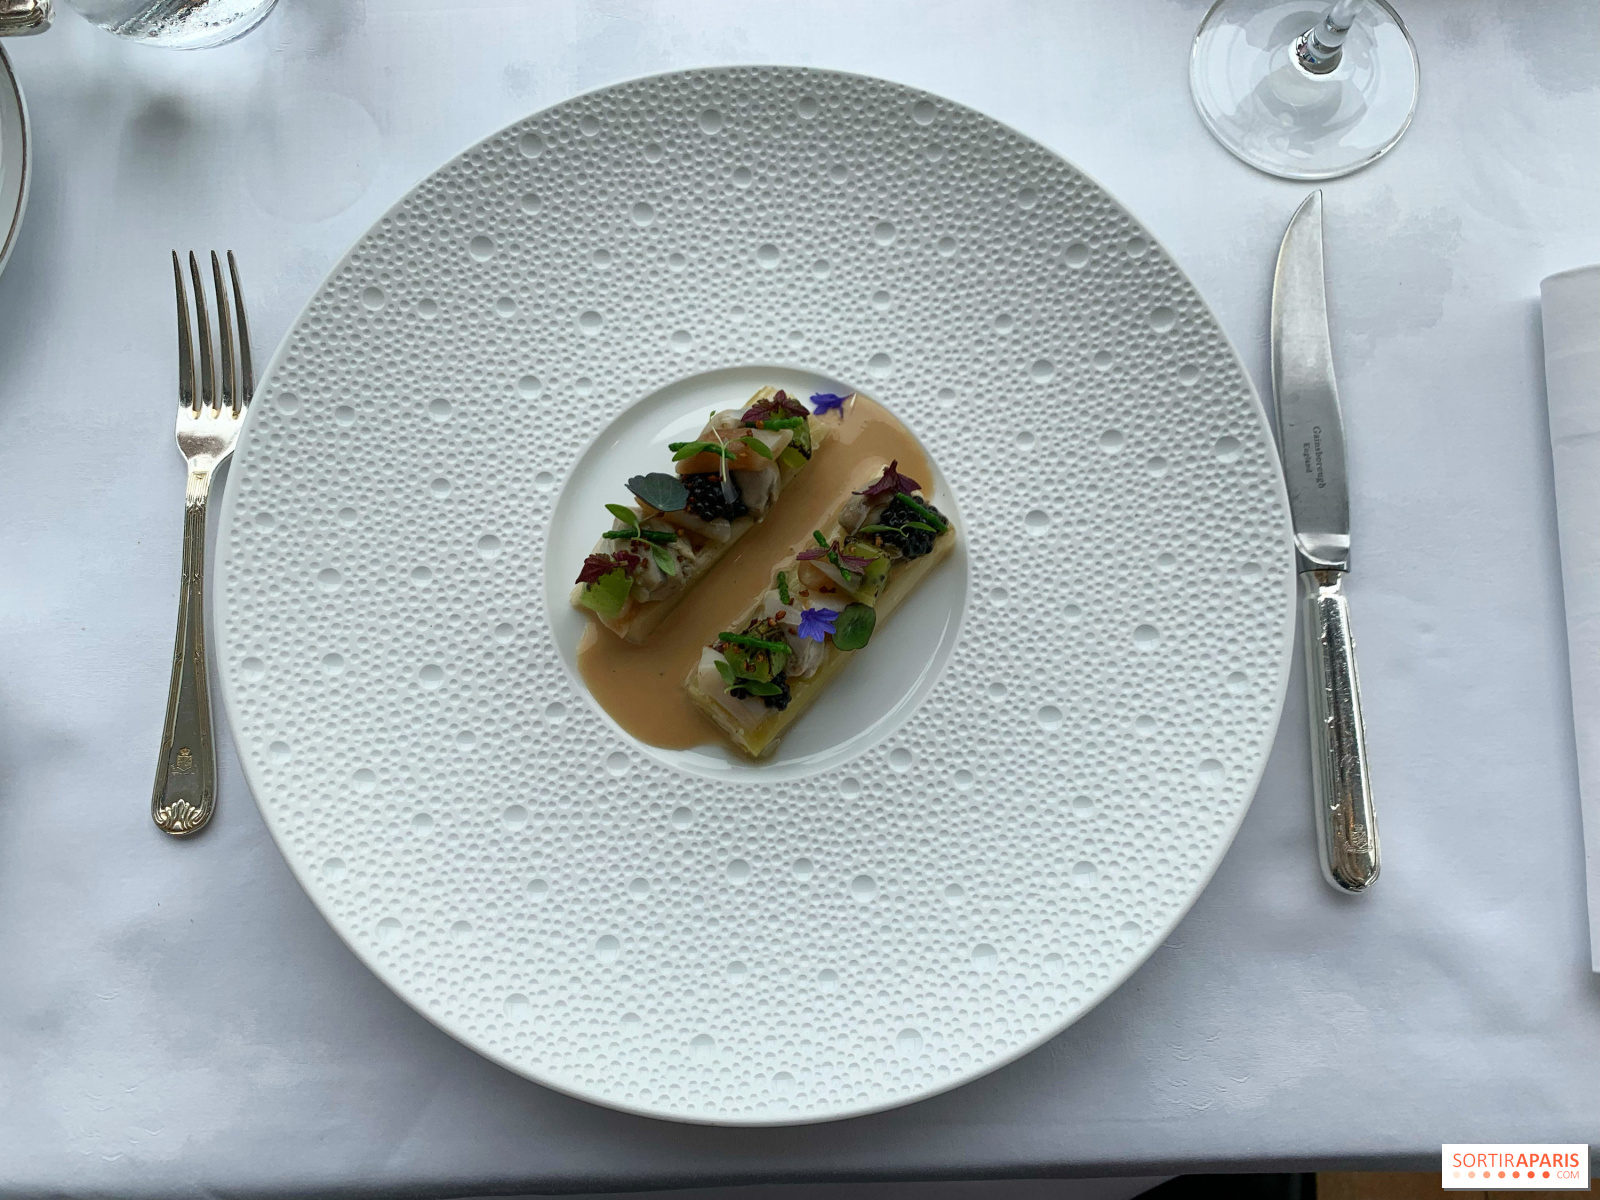 L'Oiseau Blanc, the Panoramic French Restaurant Atop The Peninsula Paris,  wins its first Michelin Star